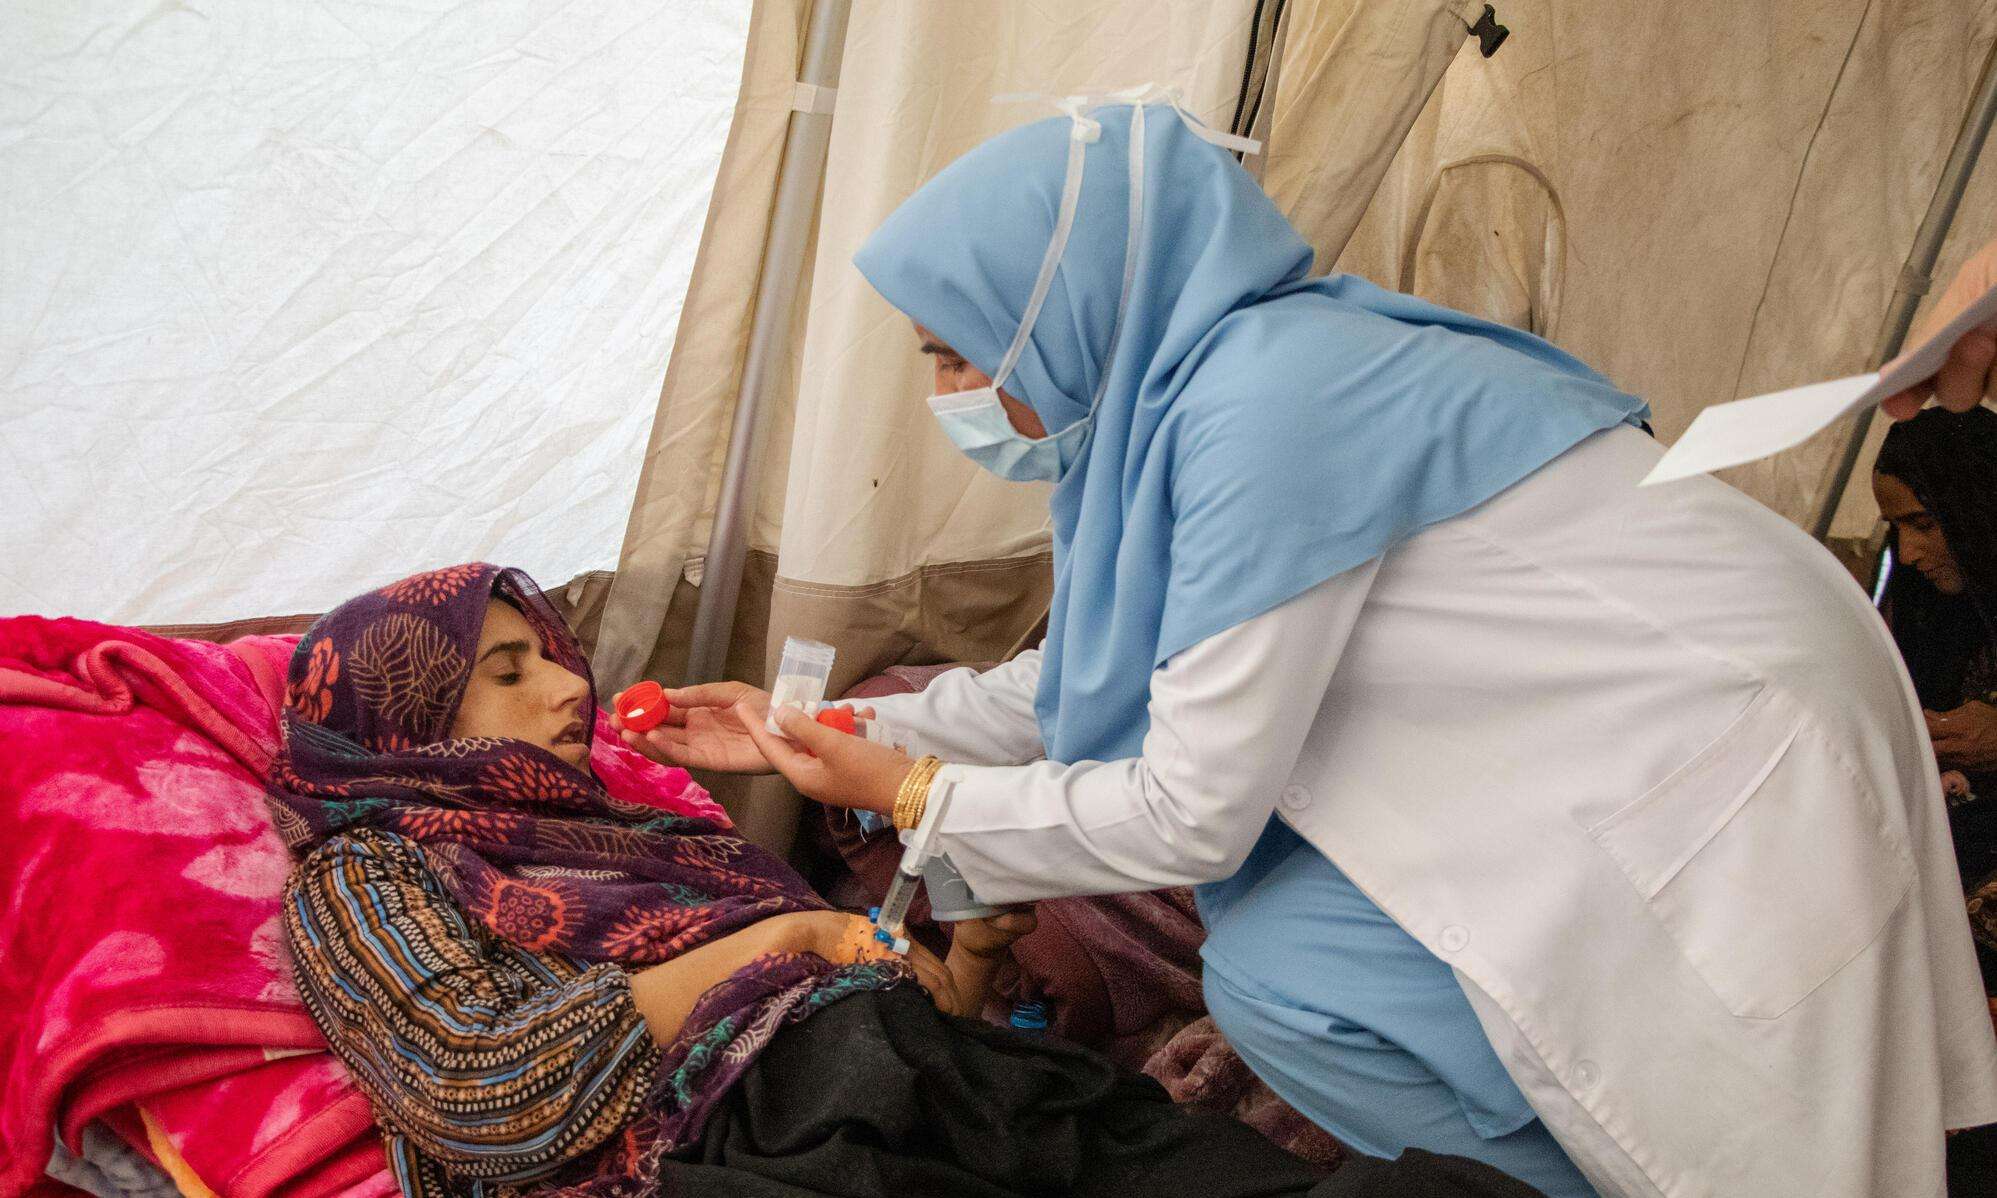 A female nurse gives an injured woman medication in an MSF emergency tent after the Afghanistan earthquake.